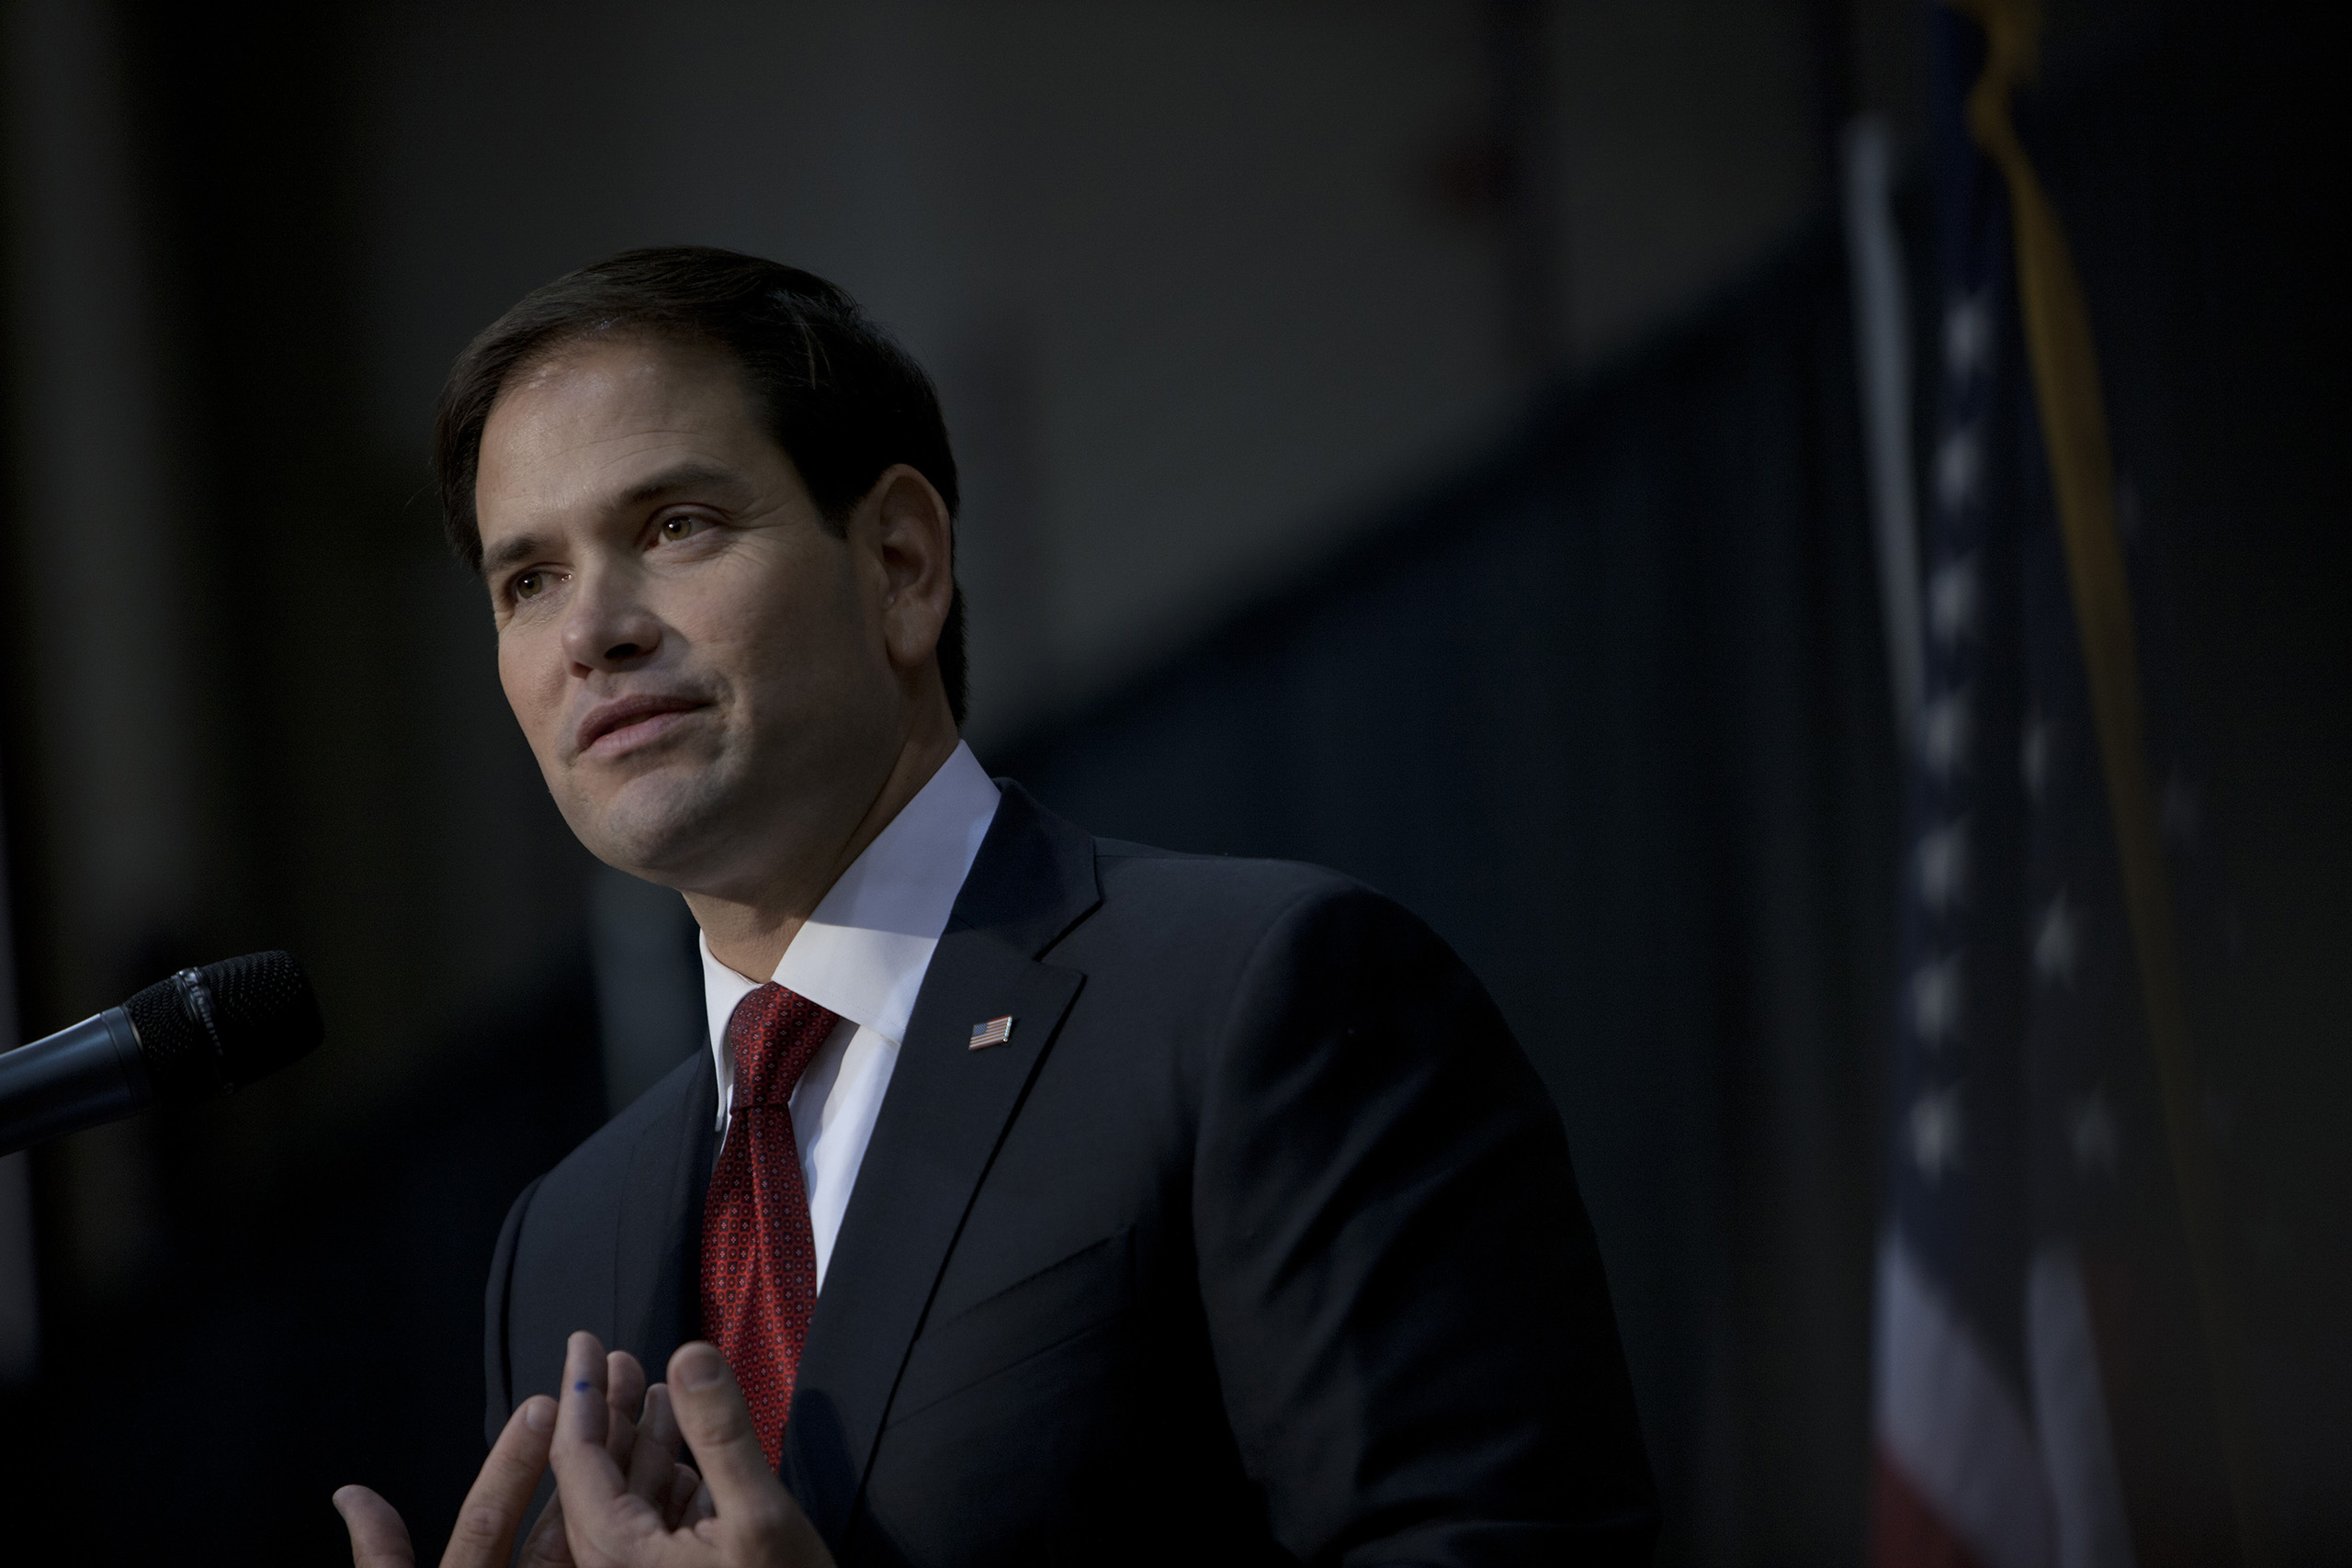 Marco Rubio attends a forum at Northwestern College in Orange City, Iowa, on Oct. 30. (Christopher Morris—VII for TIME)